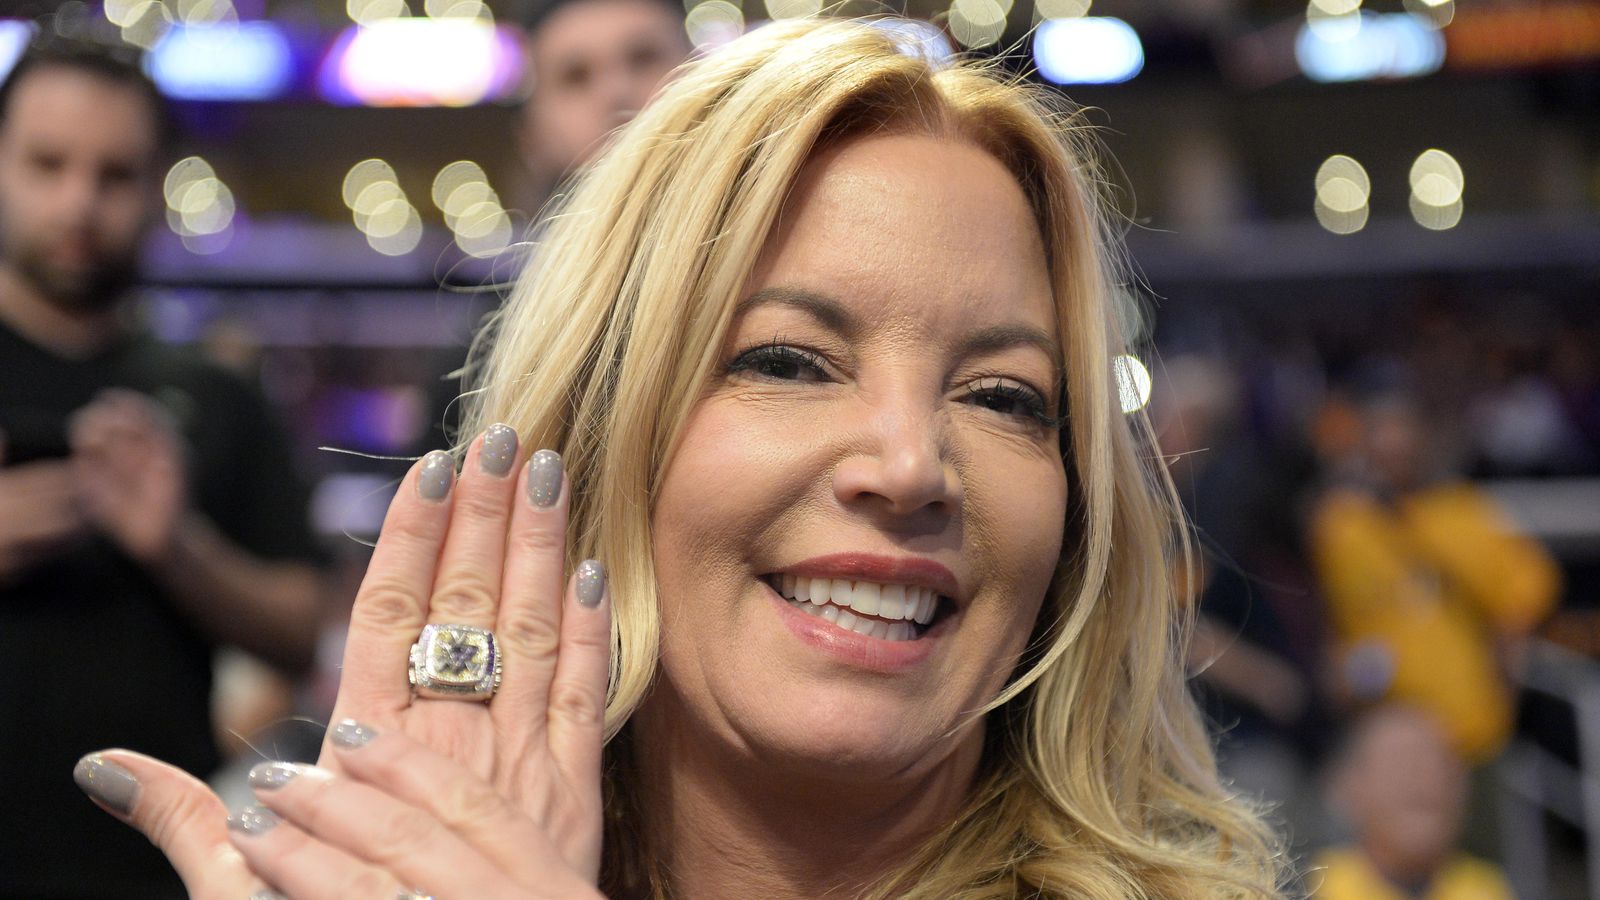 Jeanie Buss expects brother to follow ultimatum.